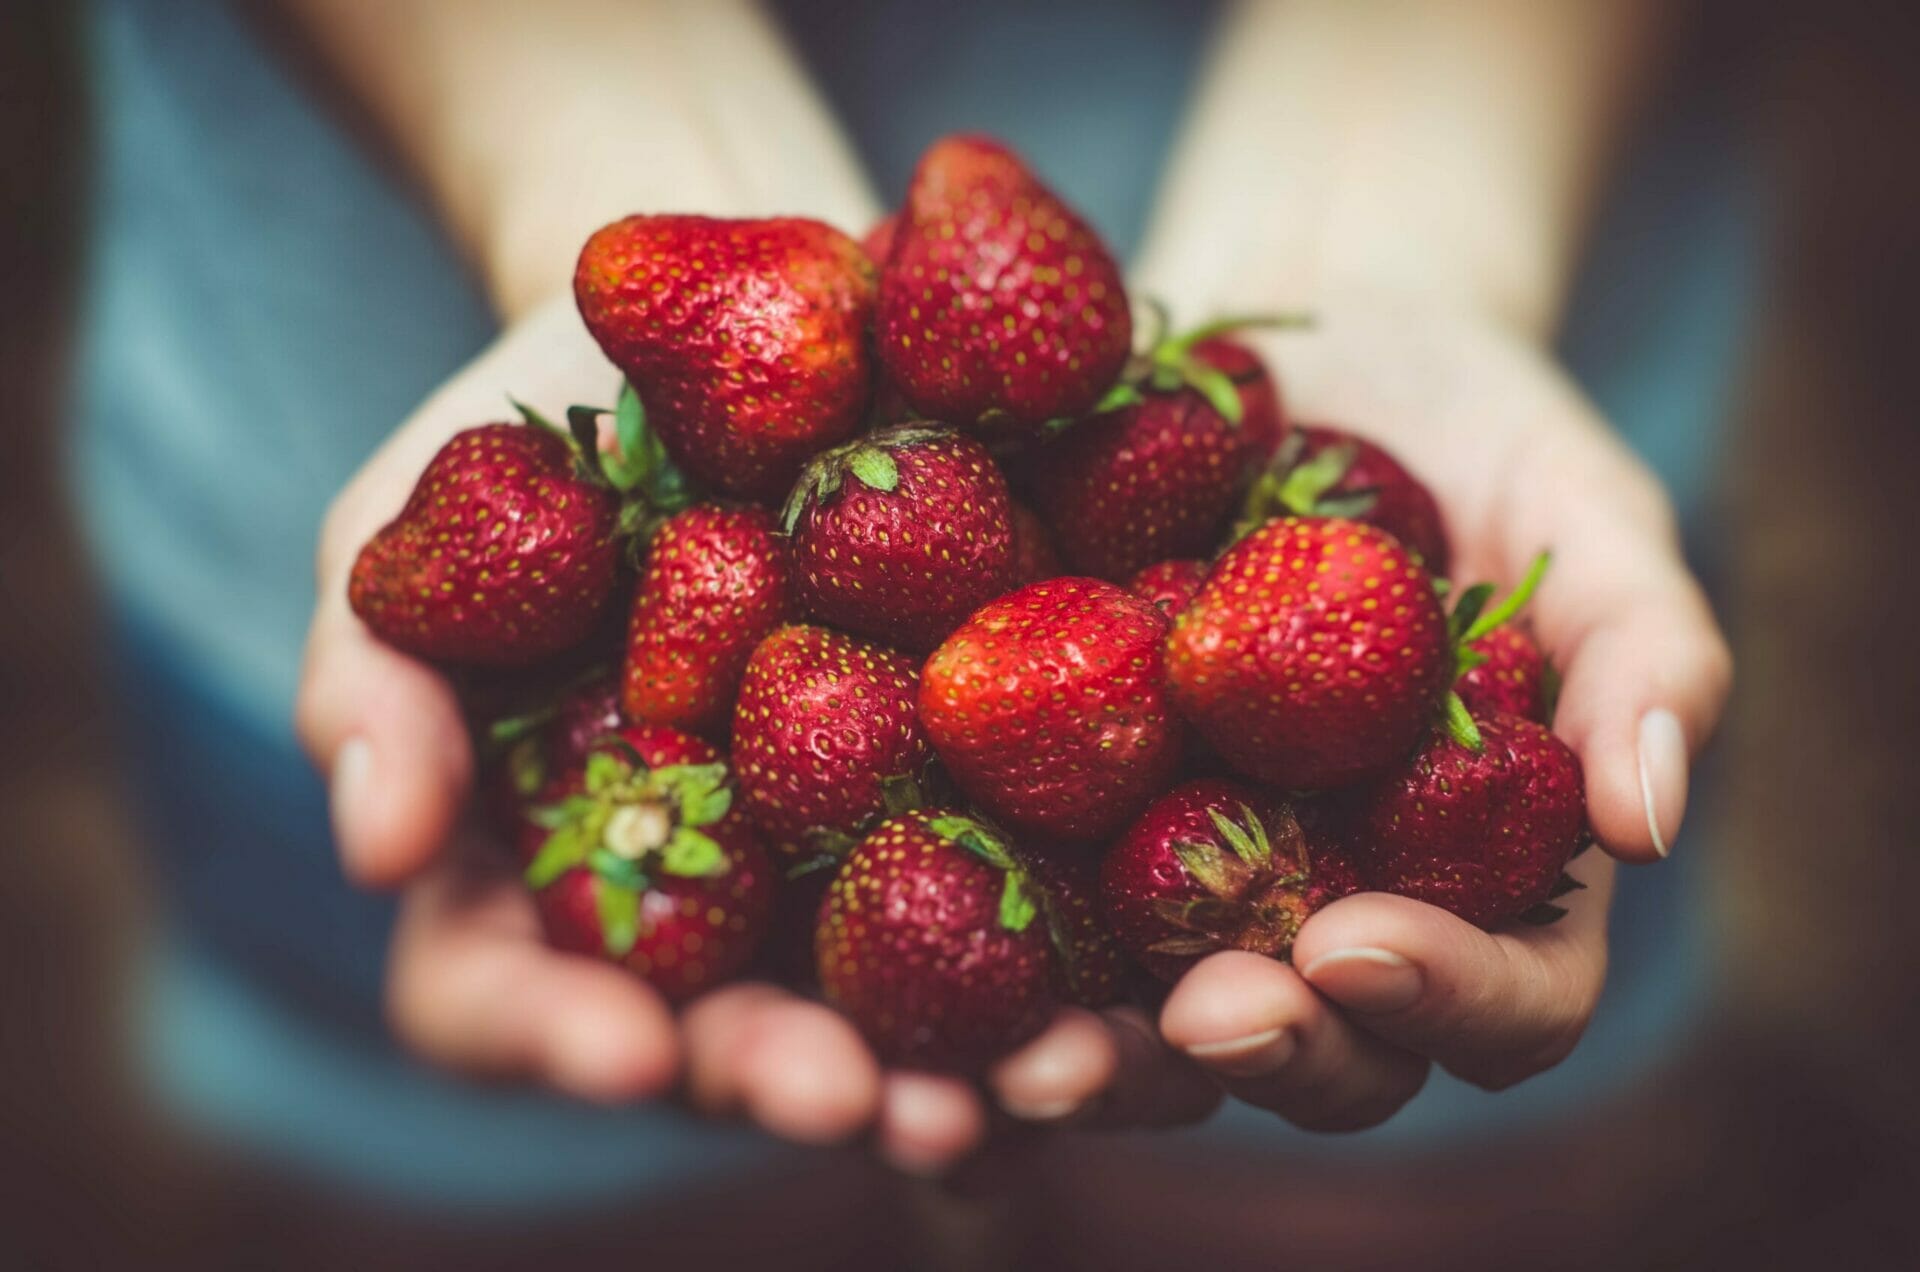 handful of strawberries - The Barriers to Thinking Abundantly